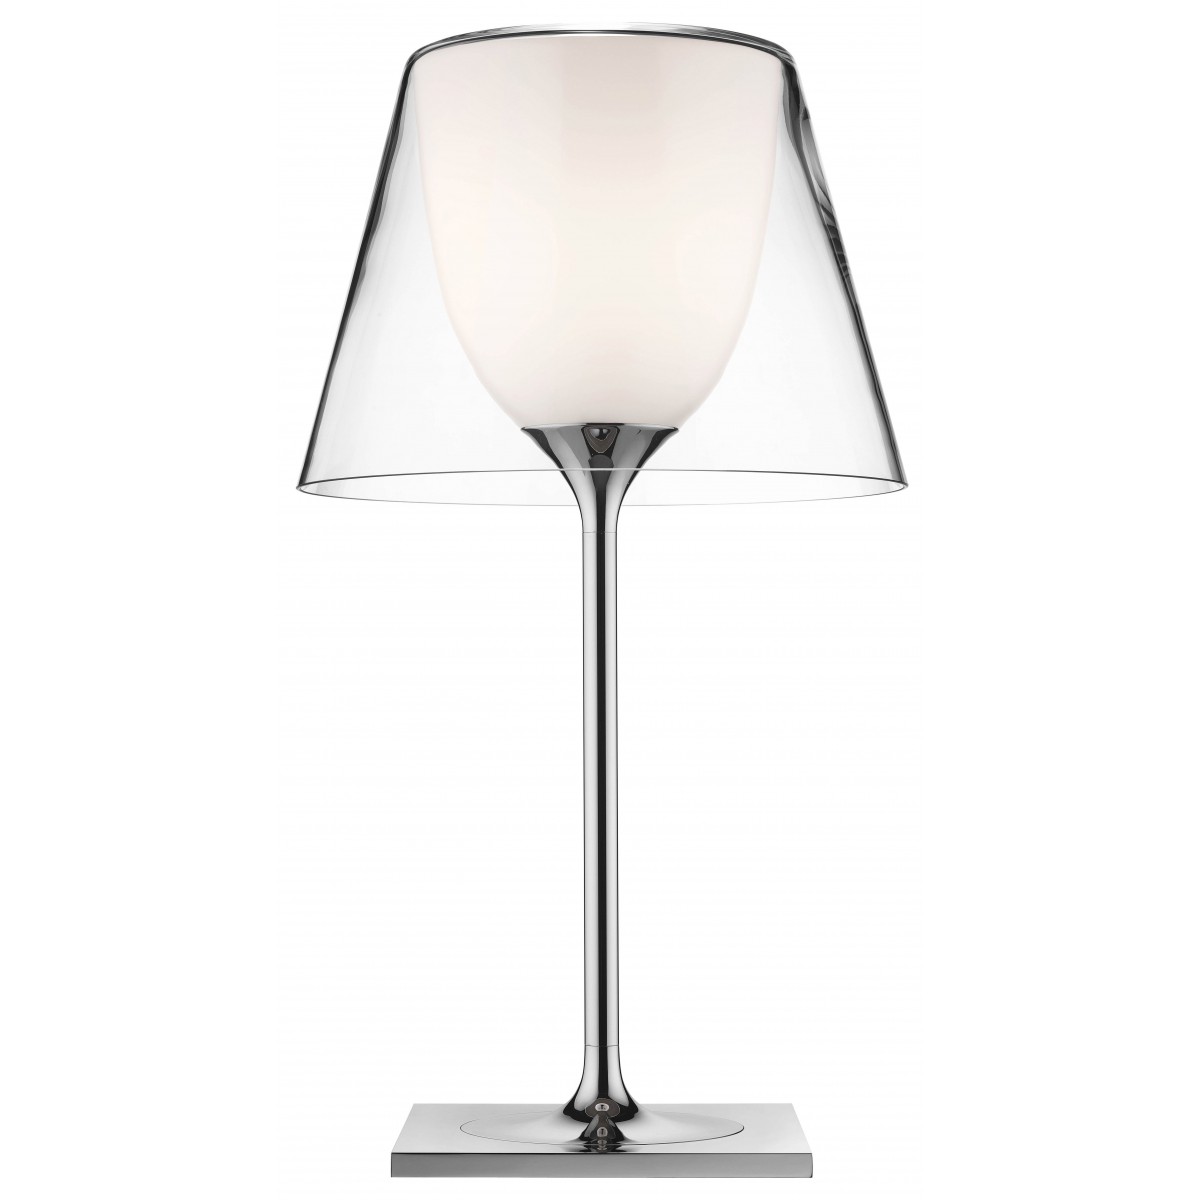 Table lamp KTribe T1 – glass